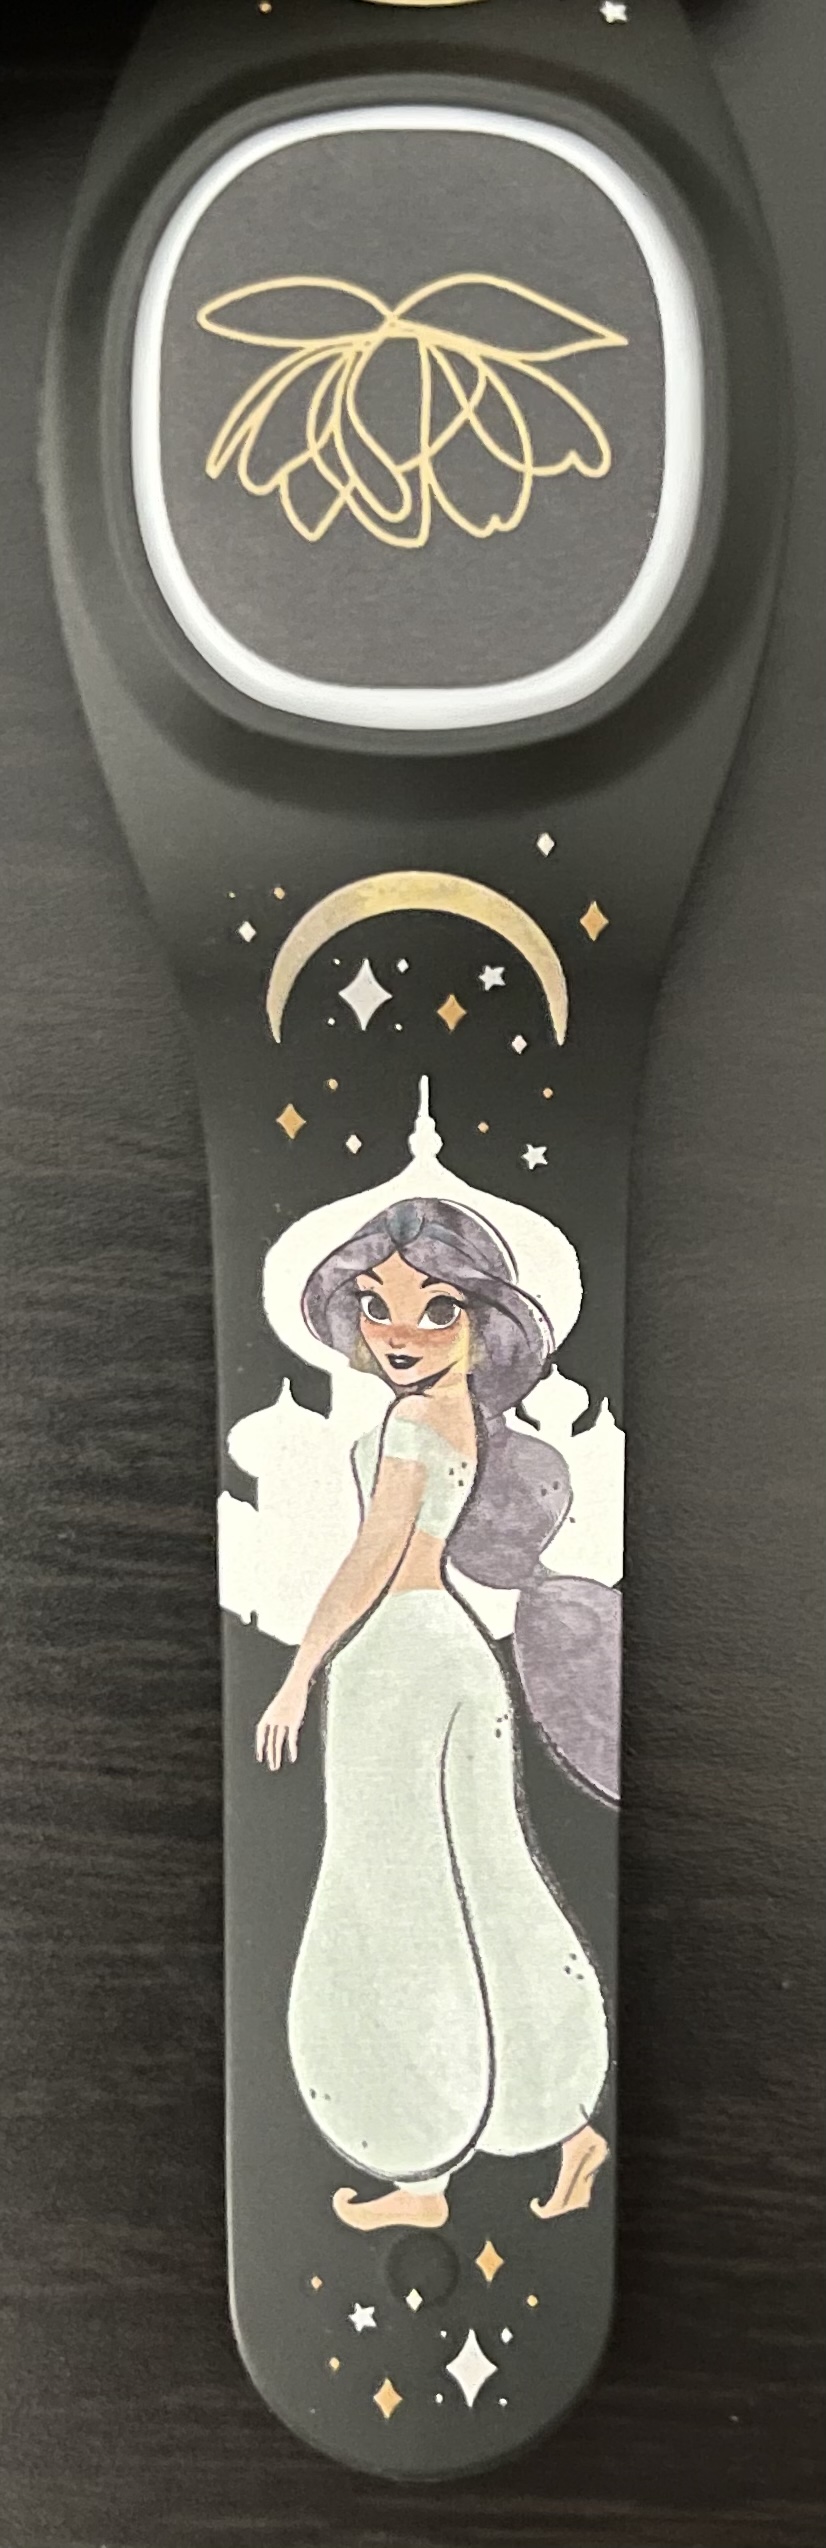 Check out this new Jasmine Limited Release MagicBand just released